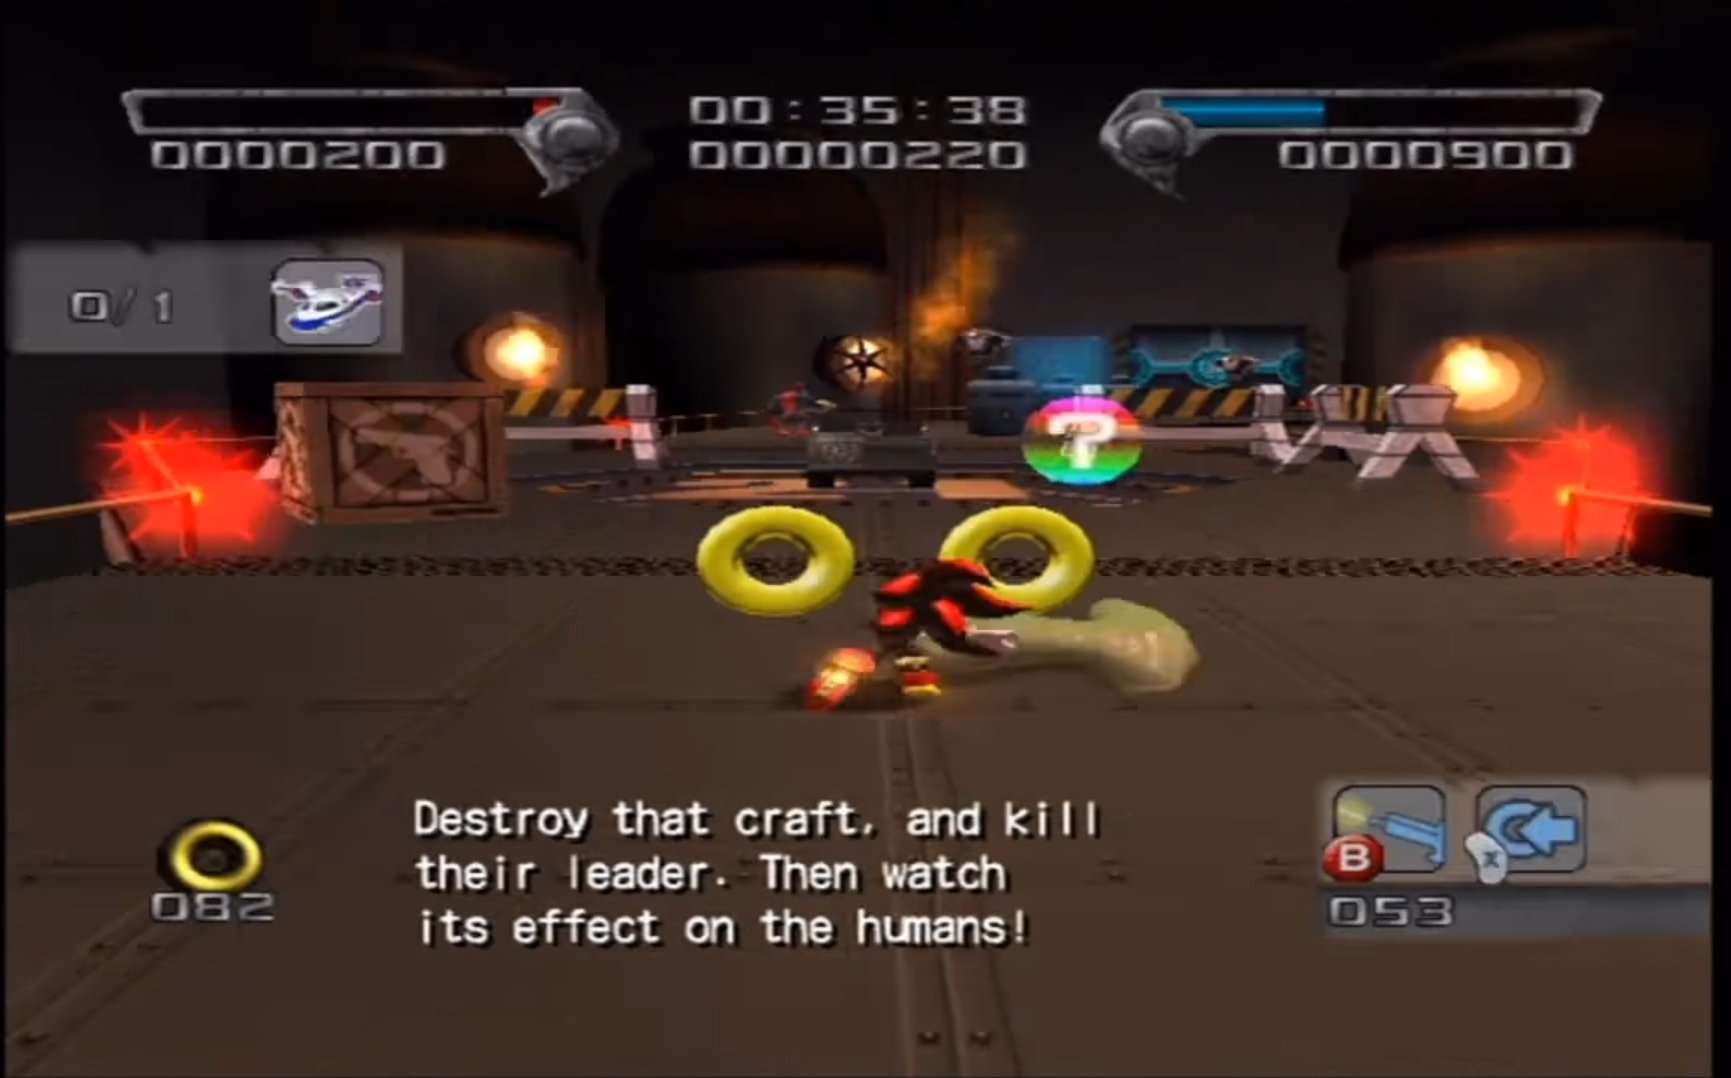 Shadow being tasked to assassinate the president in Shadow the Hedgehog.